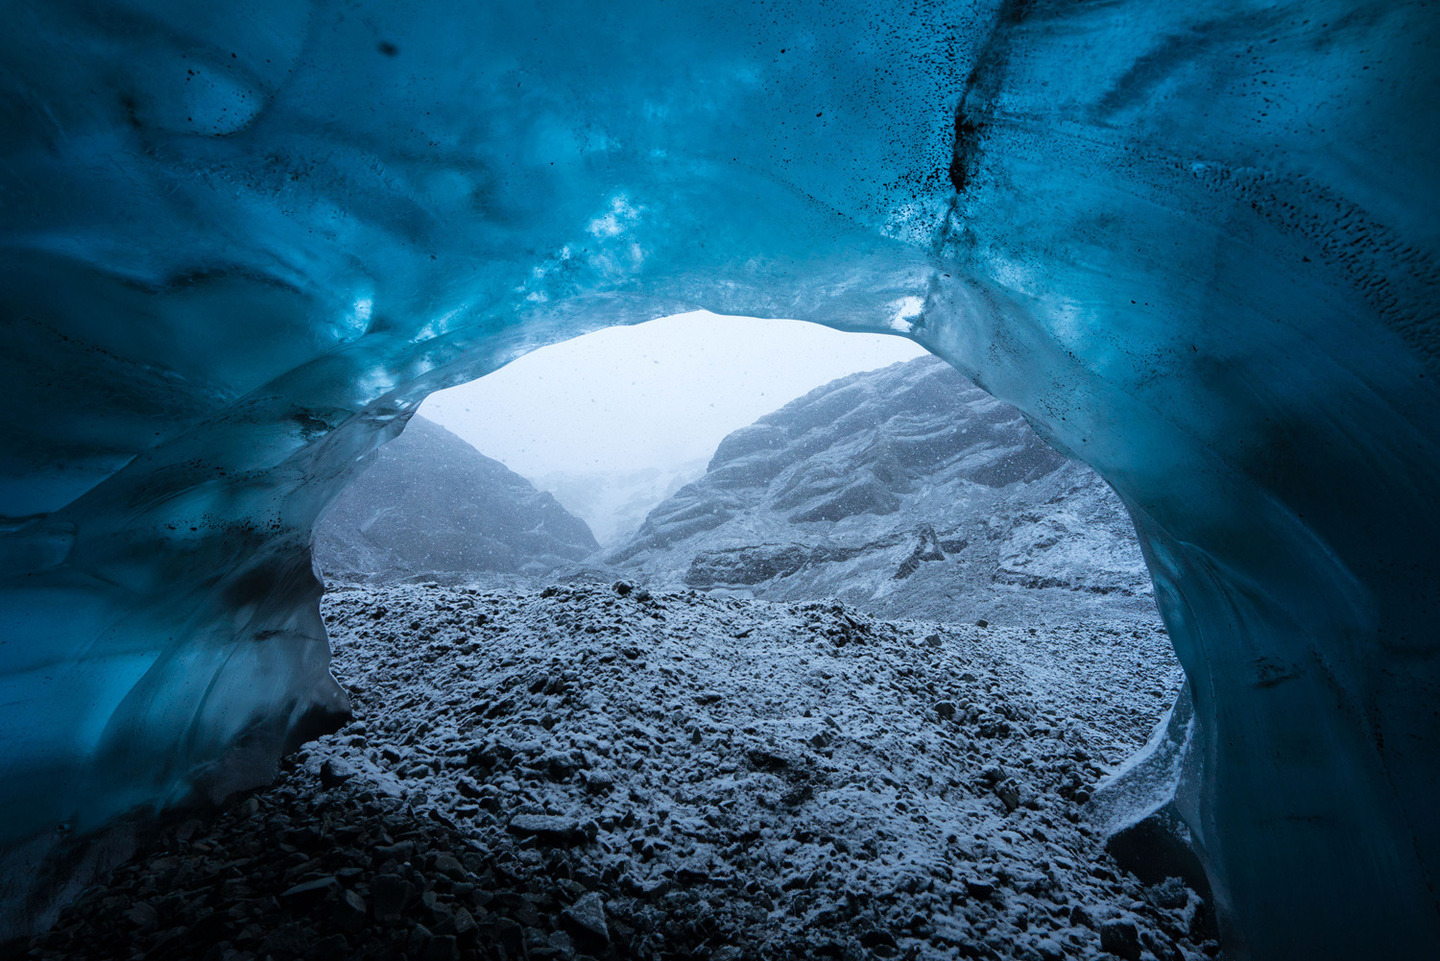 EMBARGOED FOR USE ONLINE AND PRINT UNTIL 00:01 26/11/15Inside the 'ABC cave' - which stands for Amazing Blue Cave. This view shows a snow storm outside the entrance to the cave Photographer explores Vatnaj&ouml;kull glacie using Sony's back-illuminated full-frame sensor, Iceland - 25 Nov 2015 *Full story: http://www.rexfeatures.com/nanolink/rm22 Photographer Mikael Buck with assistance from renowned local Icelandic guide Einar Runar Sigurdsson, explored the frozen world of Vatnaj&ouml;kull glacier in Iceland using Sony's world first back-illuminated full-frame sensor, which features in the 7R II camera. His images were taken without use of a tripod or any image stitching techniques in photoshop. This was made possible through Sony's new sensor technology, allowing incredibly detailed low-light hand held photography. Previously images this detailed would have required carrying bulky equipment to the caves, some of which can require hiking and climbing over a glacier for up to two hours to to access. The images were taken without the use of any external sources - just the natural light that filters through the ice caves.  (Rex Features via AP Images)